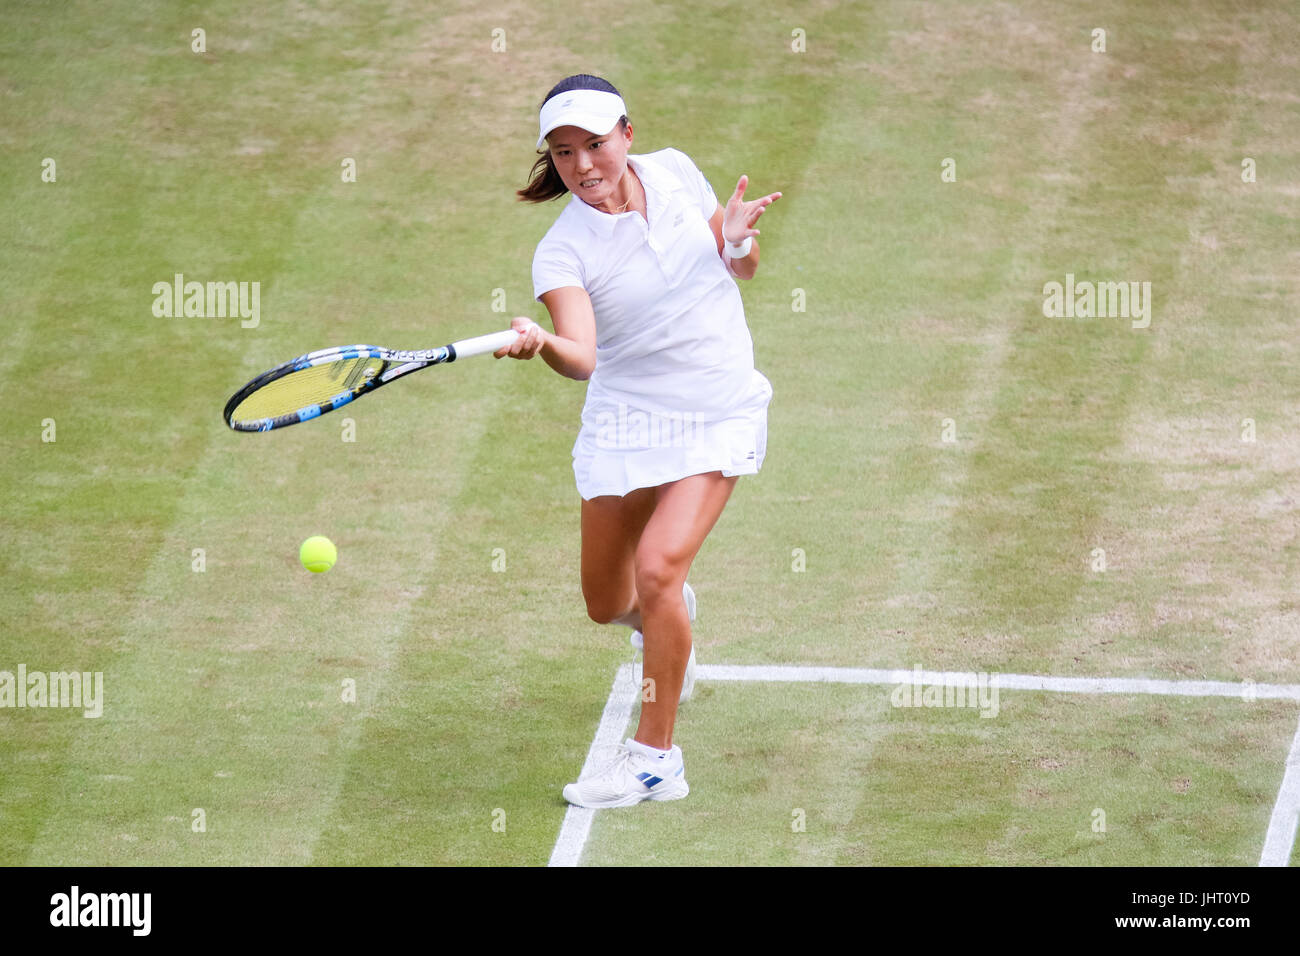 Makoto Ninomiya (JPN), JULY 14, 2017 - Tennis : Makoto Ninomiya of Japan during the Women's doubles semi-final match of the Wimbledon Lawn Tennis Championships against Hao-Ching Chan of Taiwan and Monica Niculescu of Romania at the All England Lawn Tennis and Croquet Club in London, England. (Photo by AFLO) Stock Photo